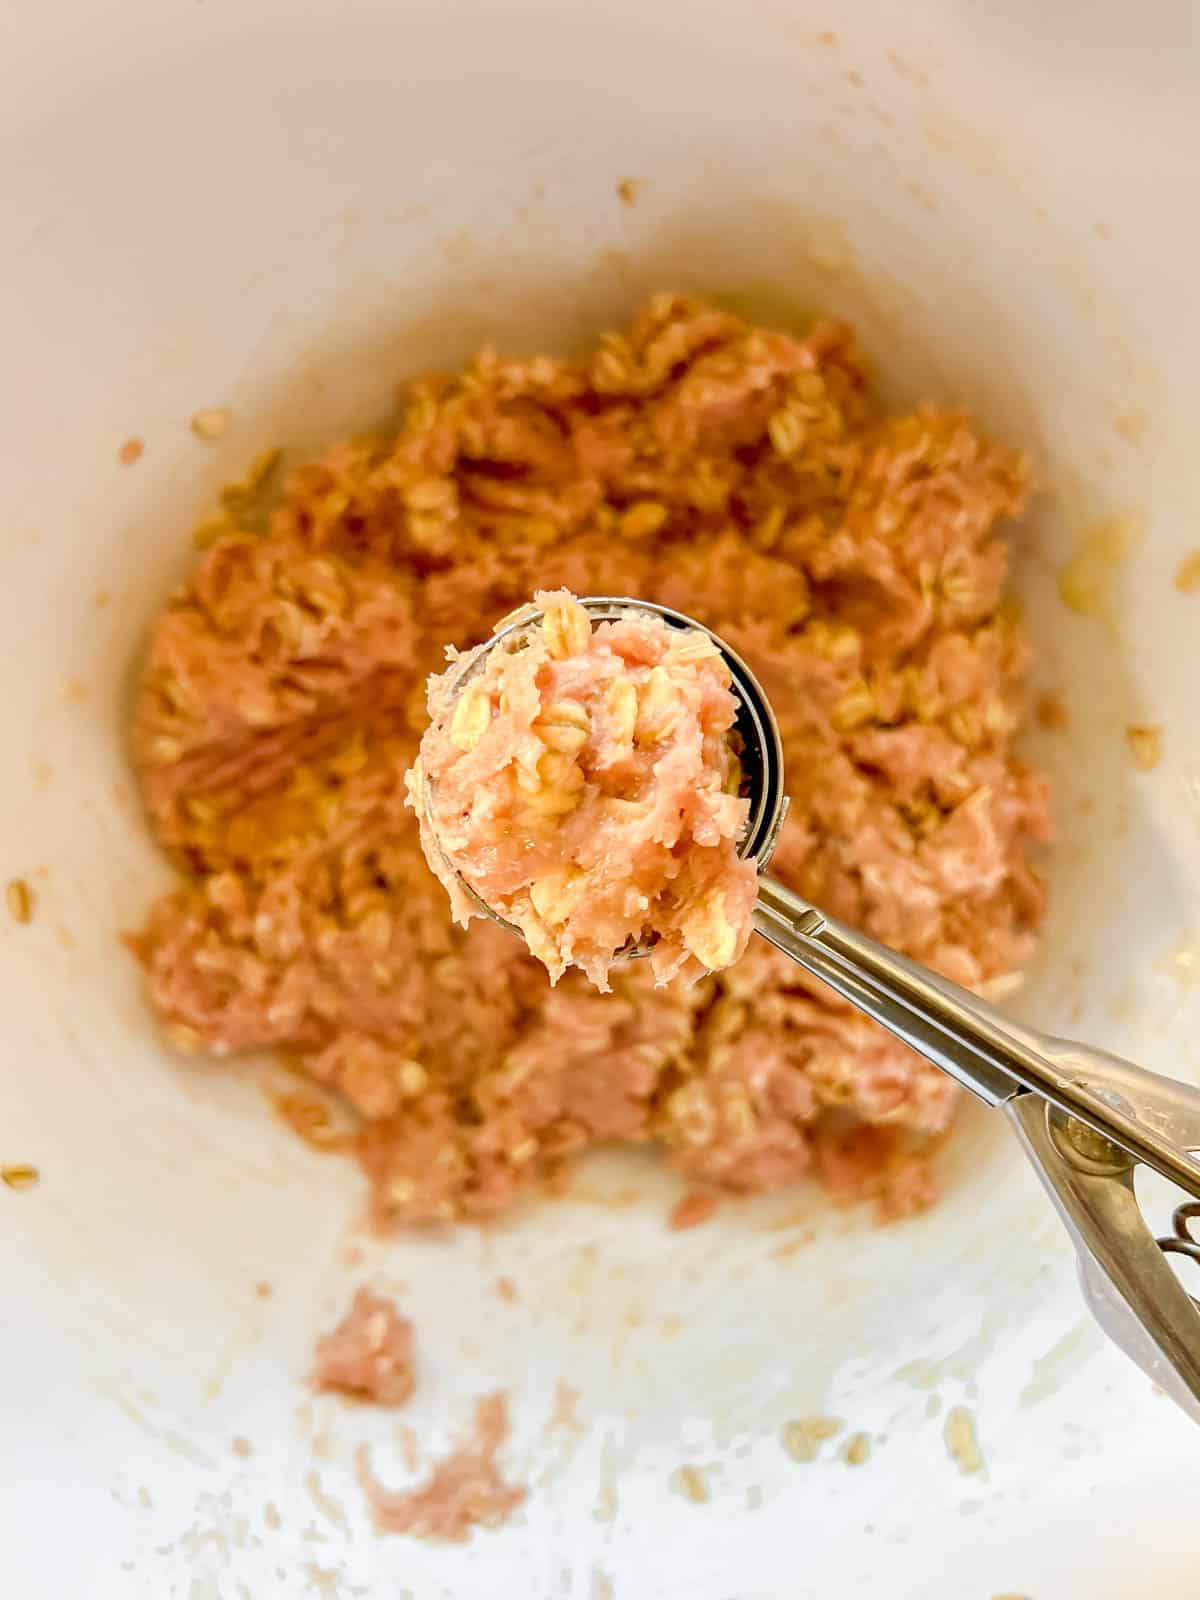 Scooping the mixture into meatballs.